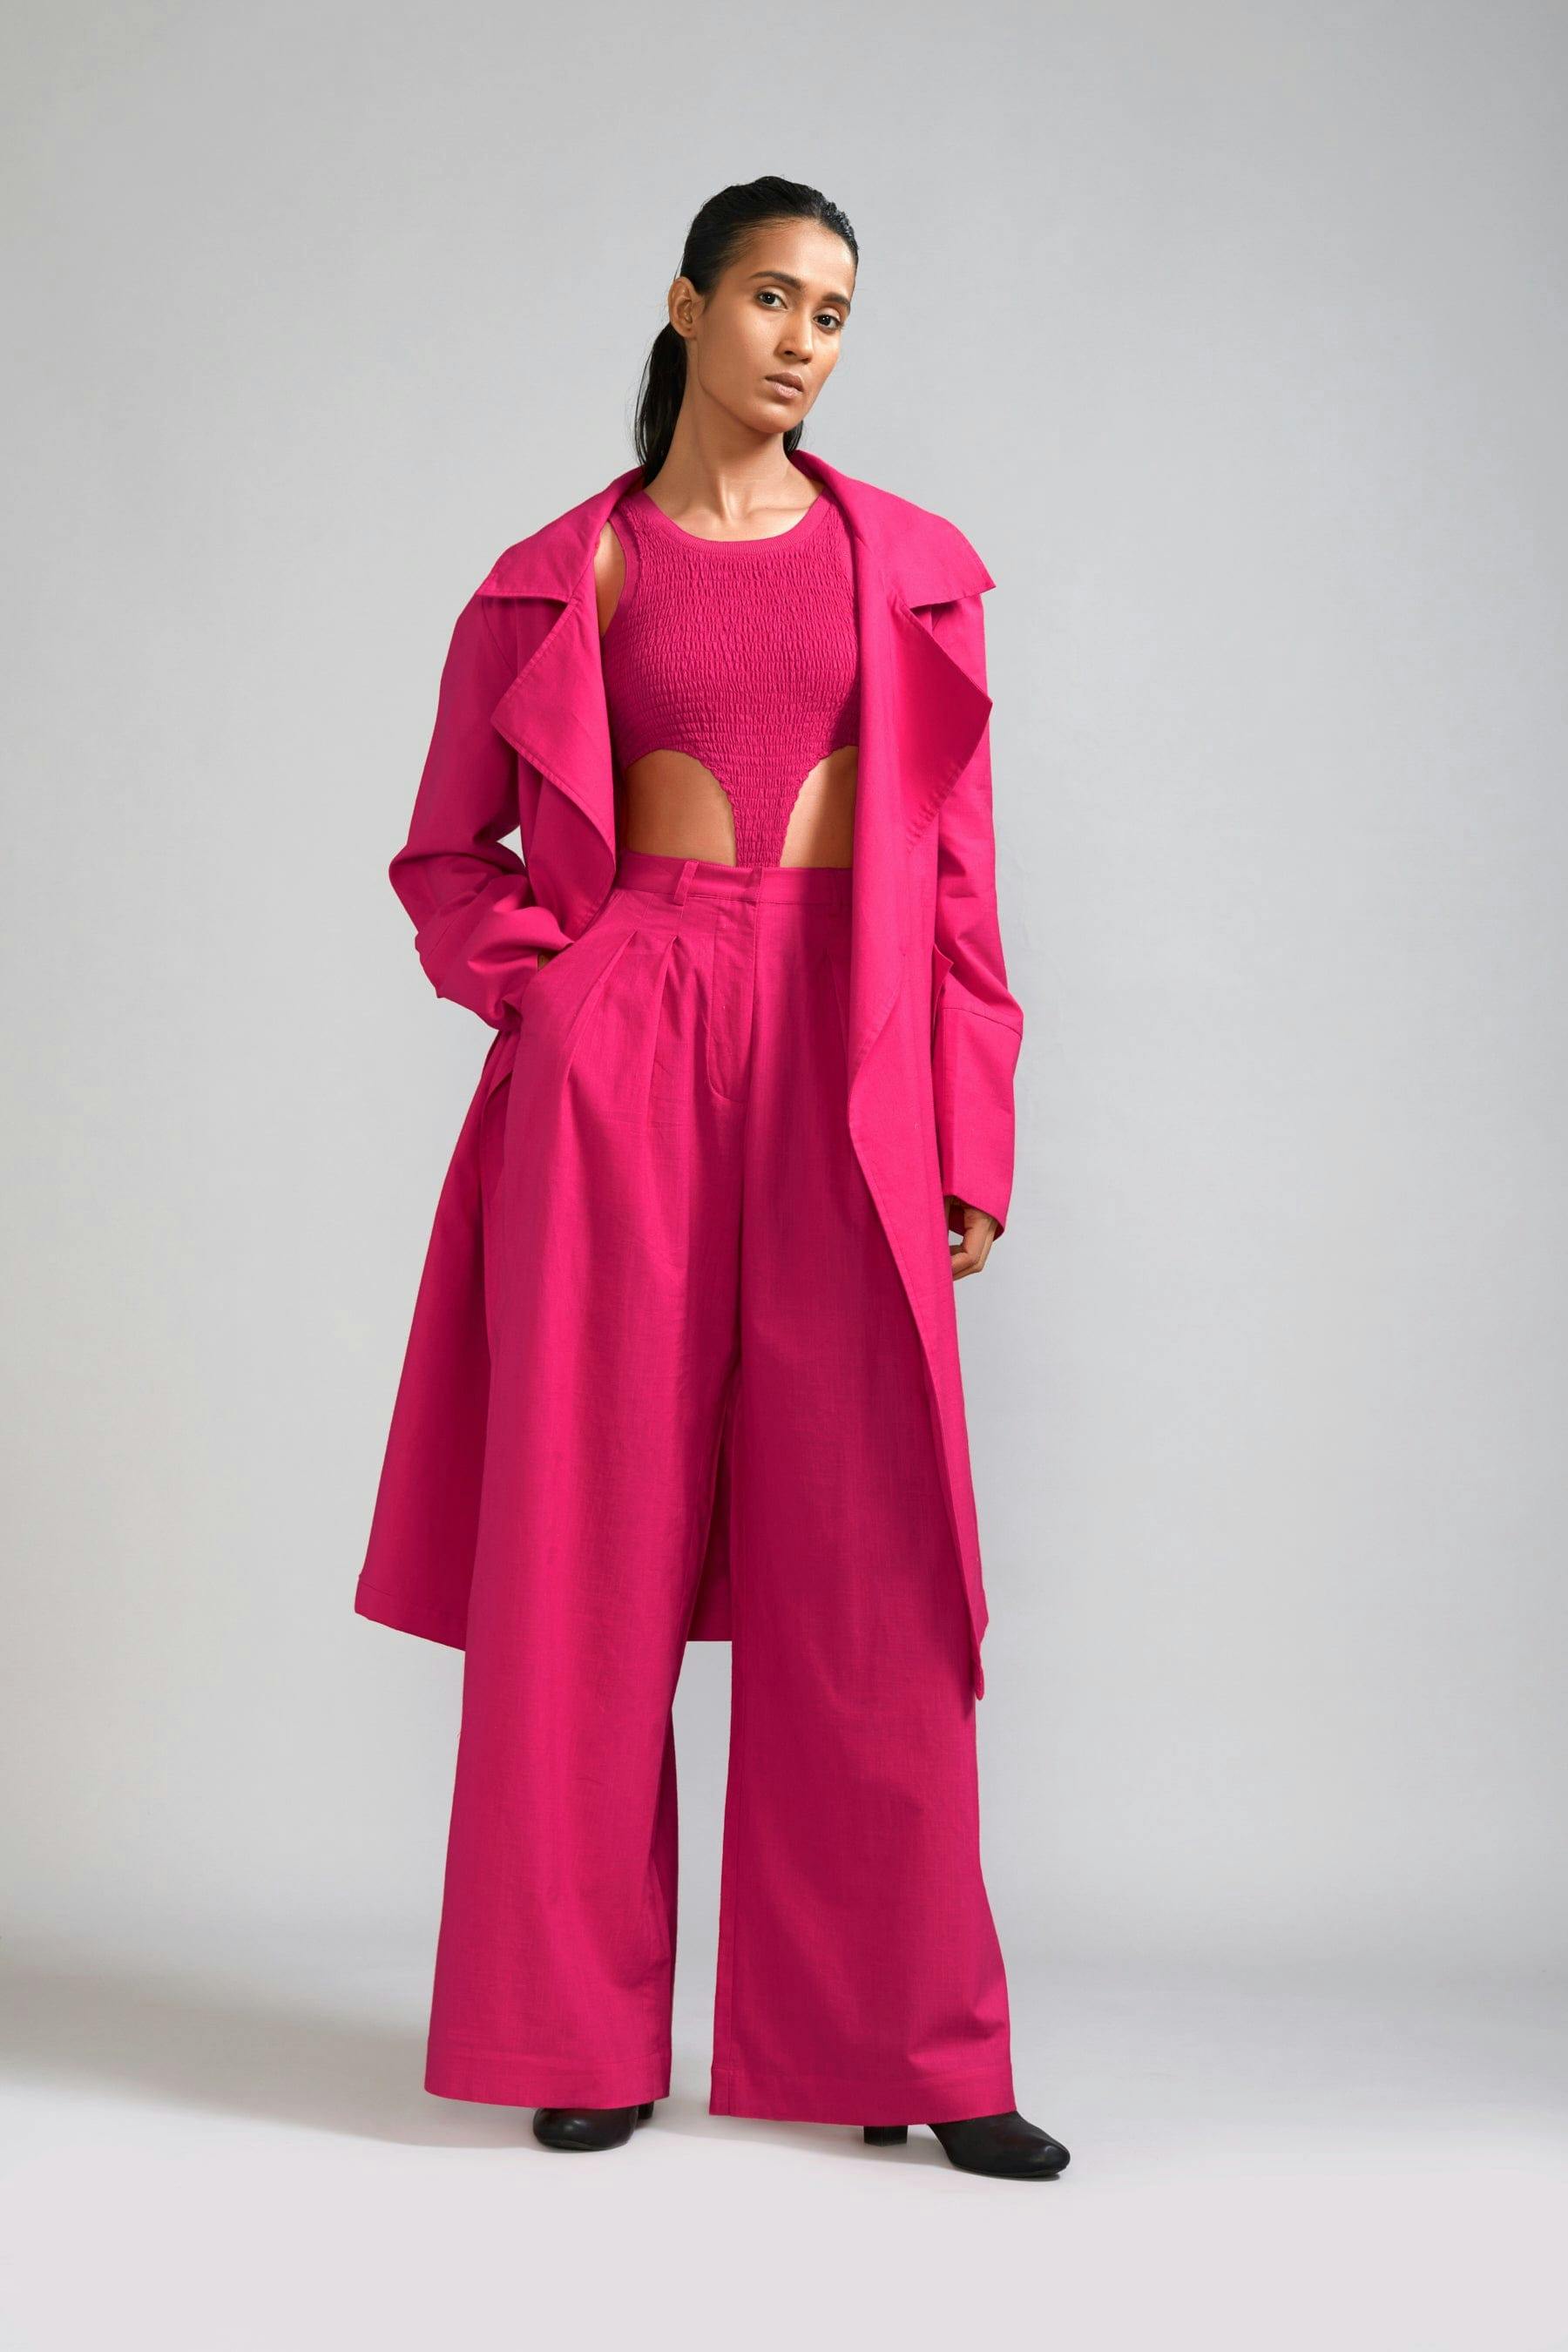 Pink Trench Jacket Set (3 PCS), a product by Style Mati